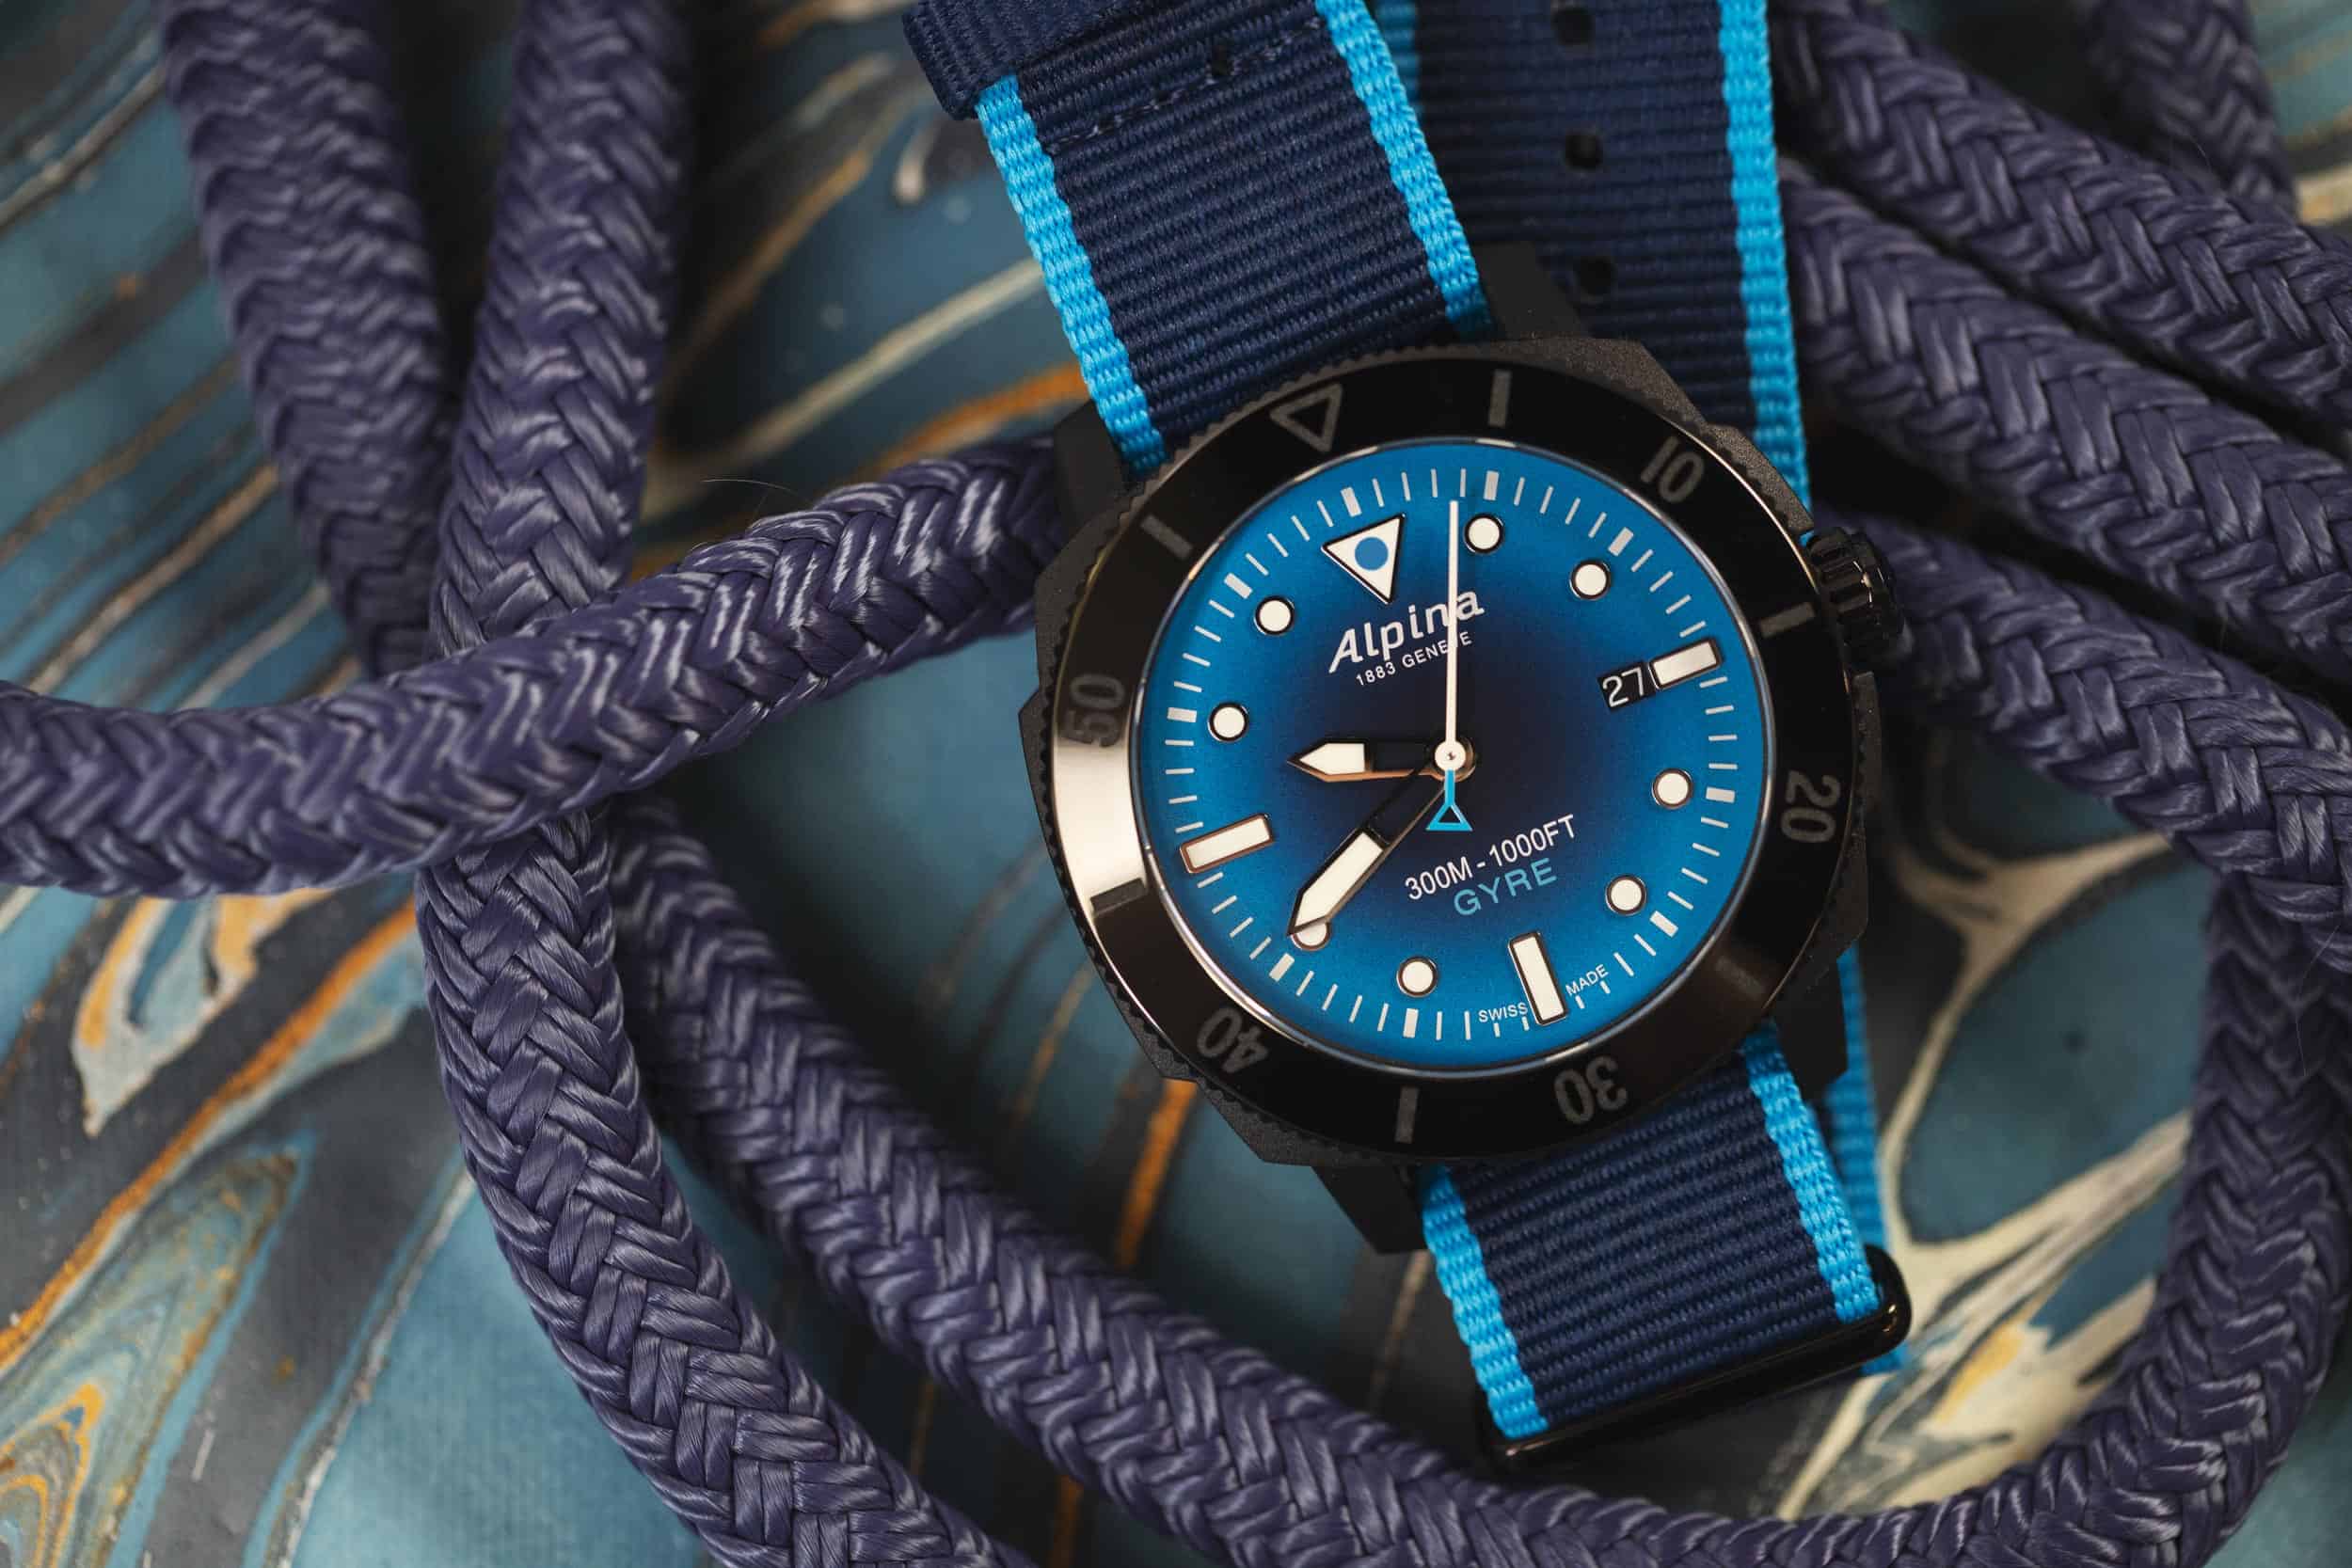 An Interview with Alpina’s Brand Director on the Making of the Seastrong Gyre